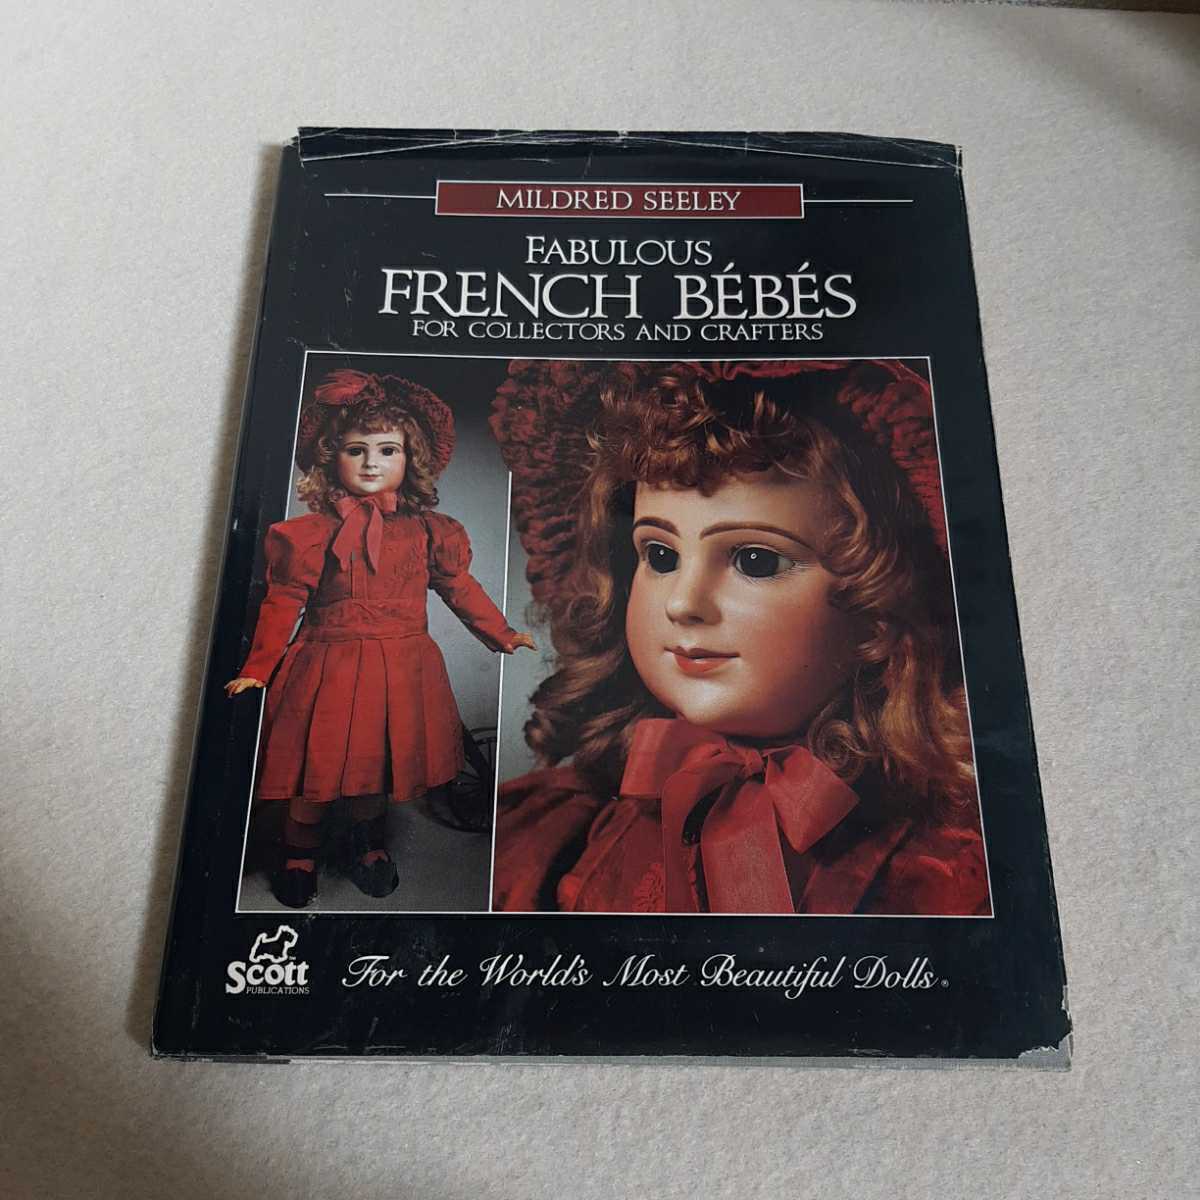 ★B9☆洋書☆MILDRED SEELEY☆FABULOUS☆FRENCH BEBES☆FOR COLLECTORS AND CRAFTERS☆人形の本☆